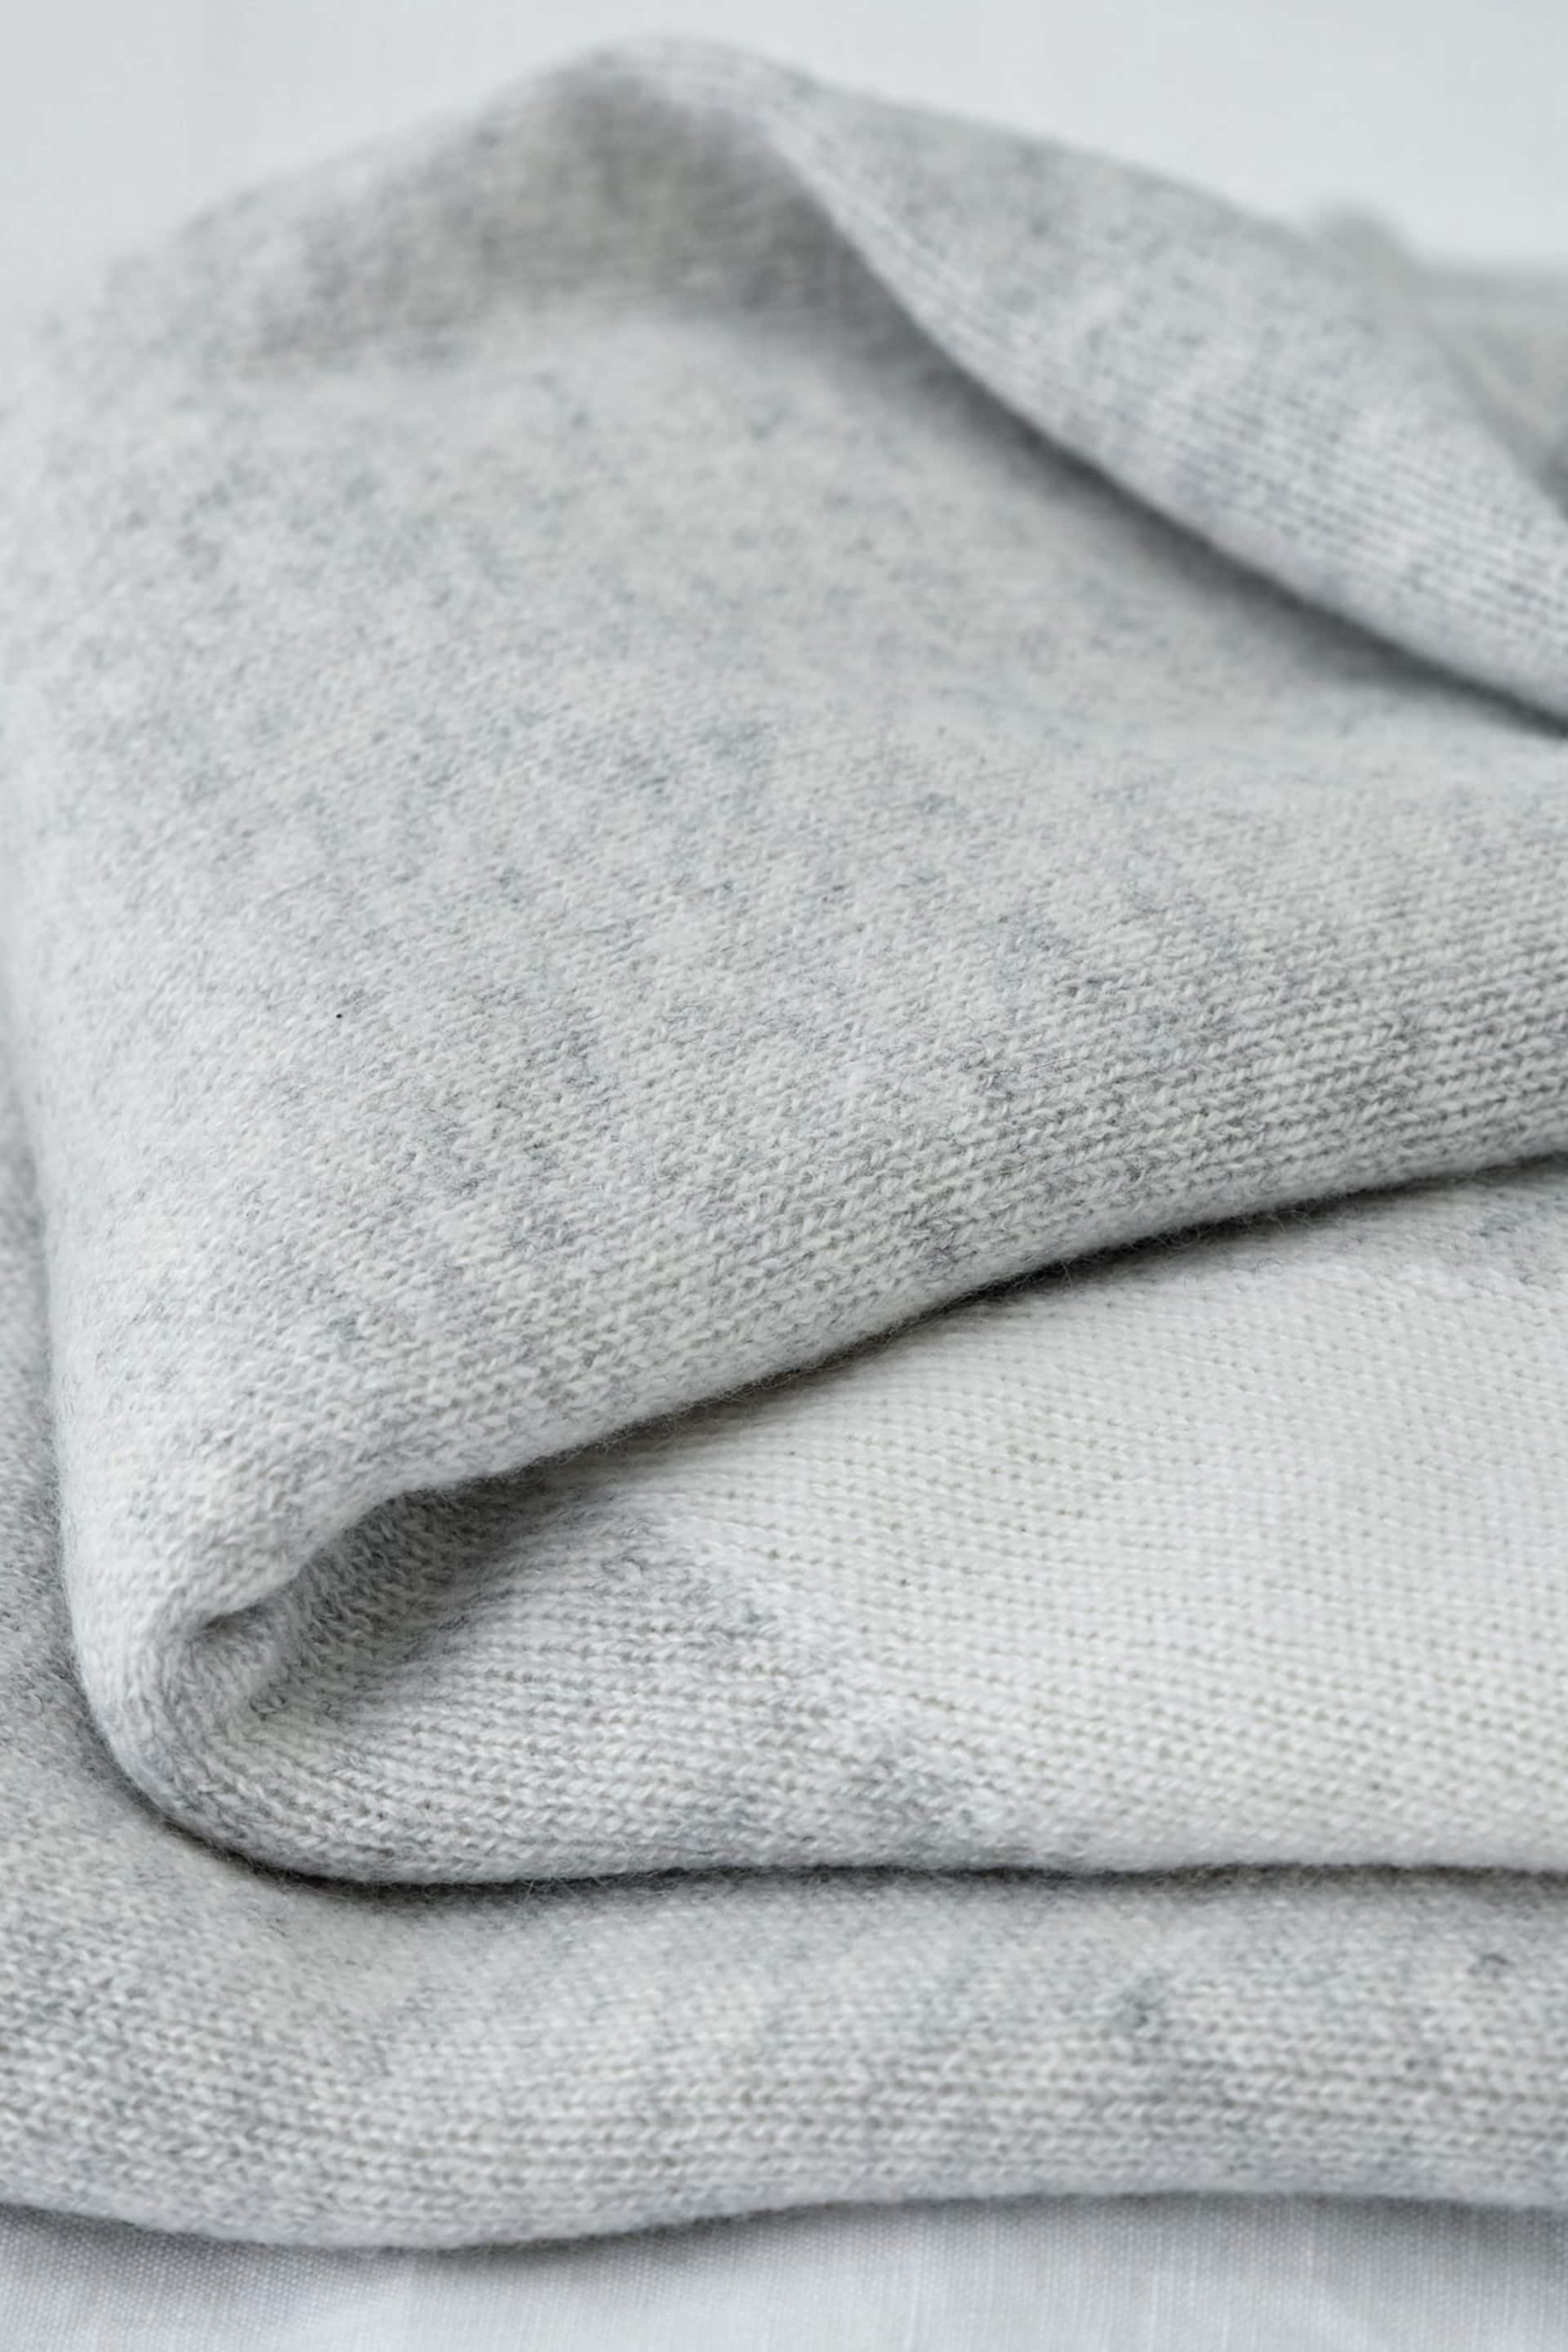 The White Company Baby Grey Star Luxury Cashmere Blanket - Image 2 of 4